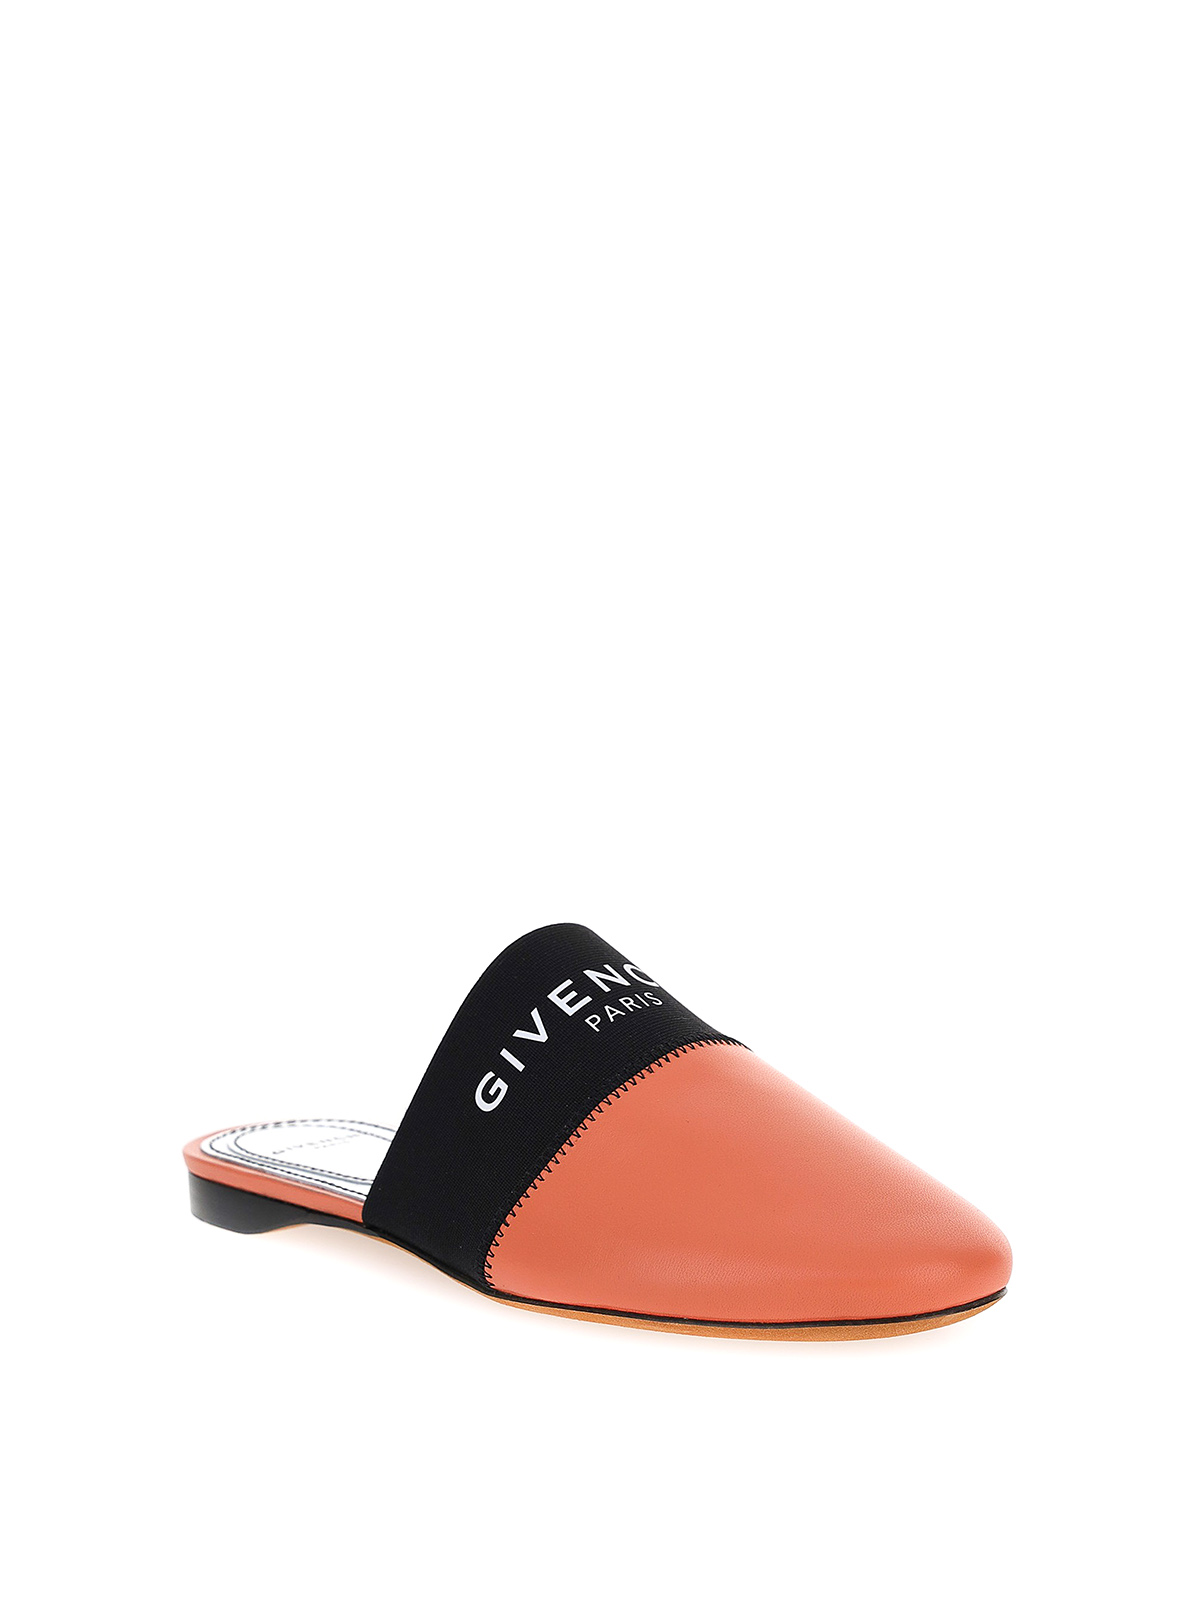 givenchy bedford mules